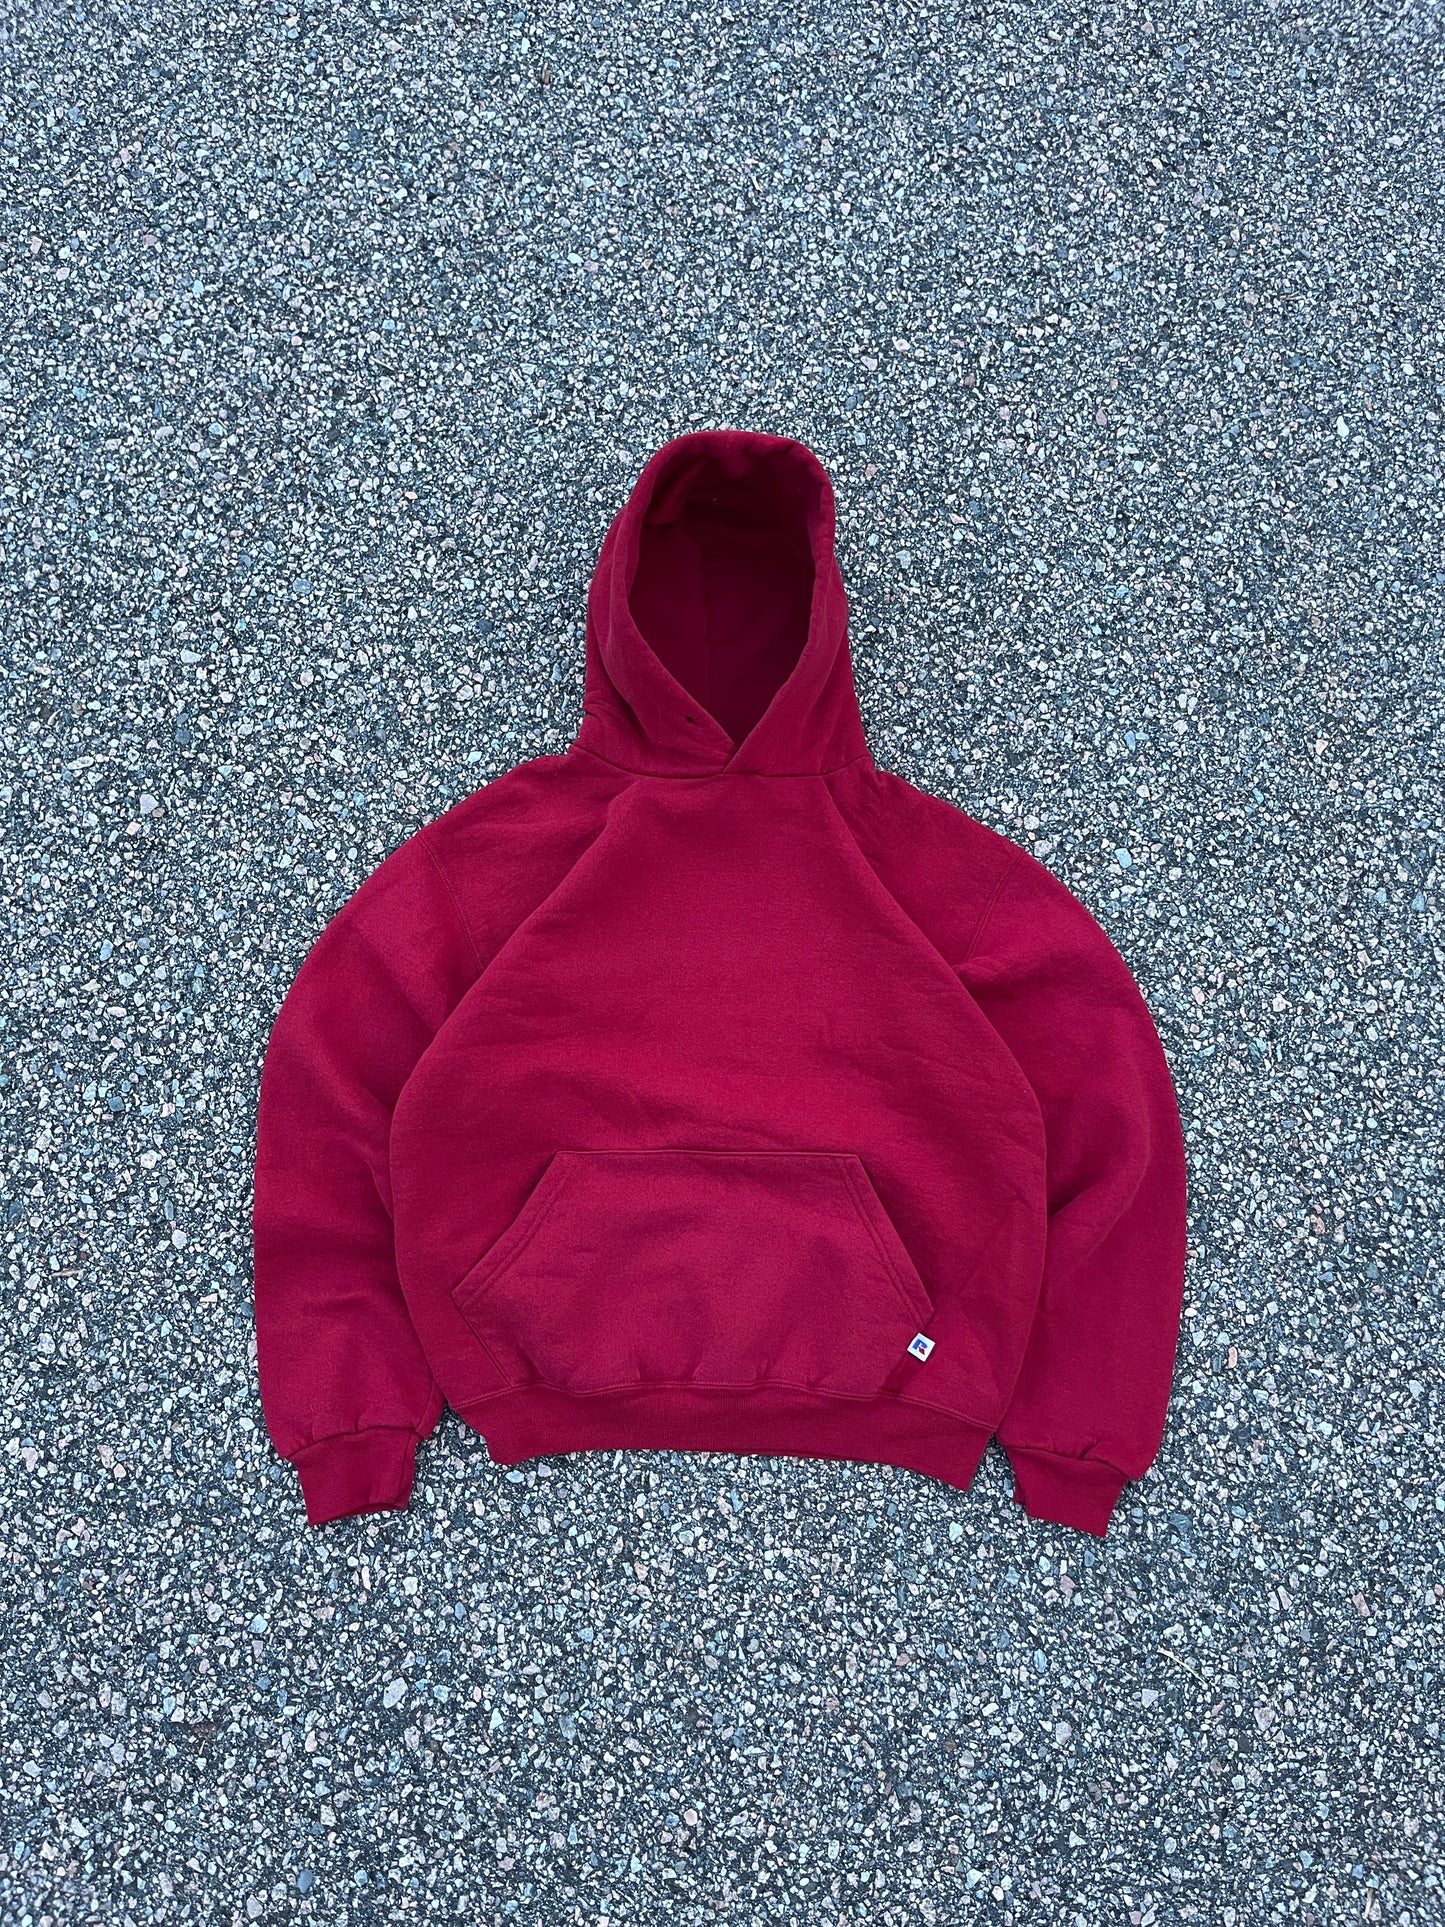 00’s Faded Red Russell Hoodie - Medium